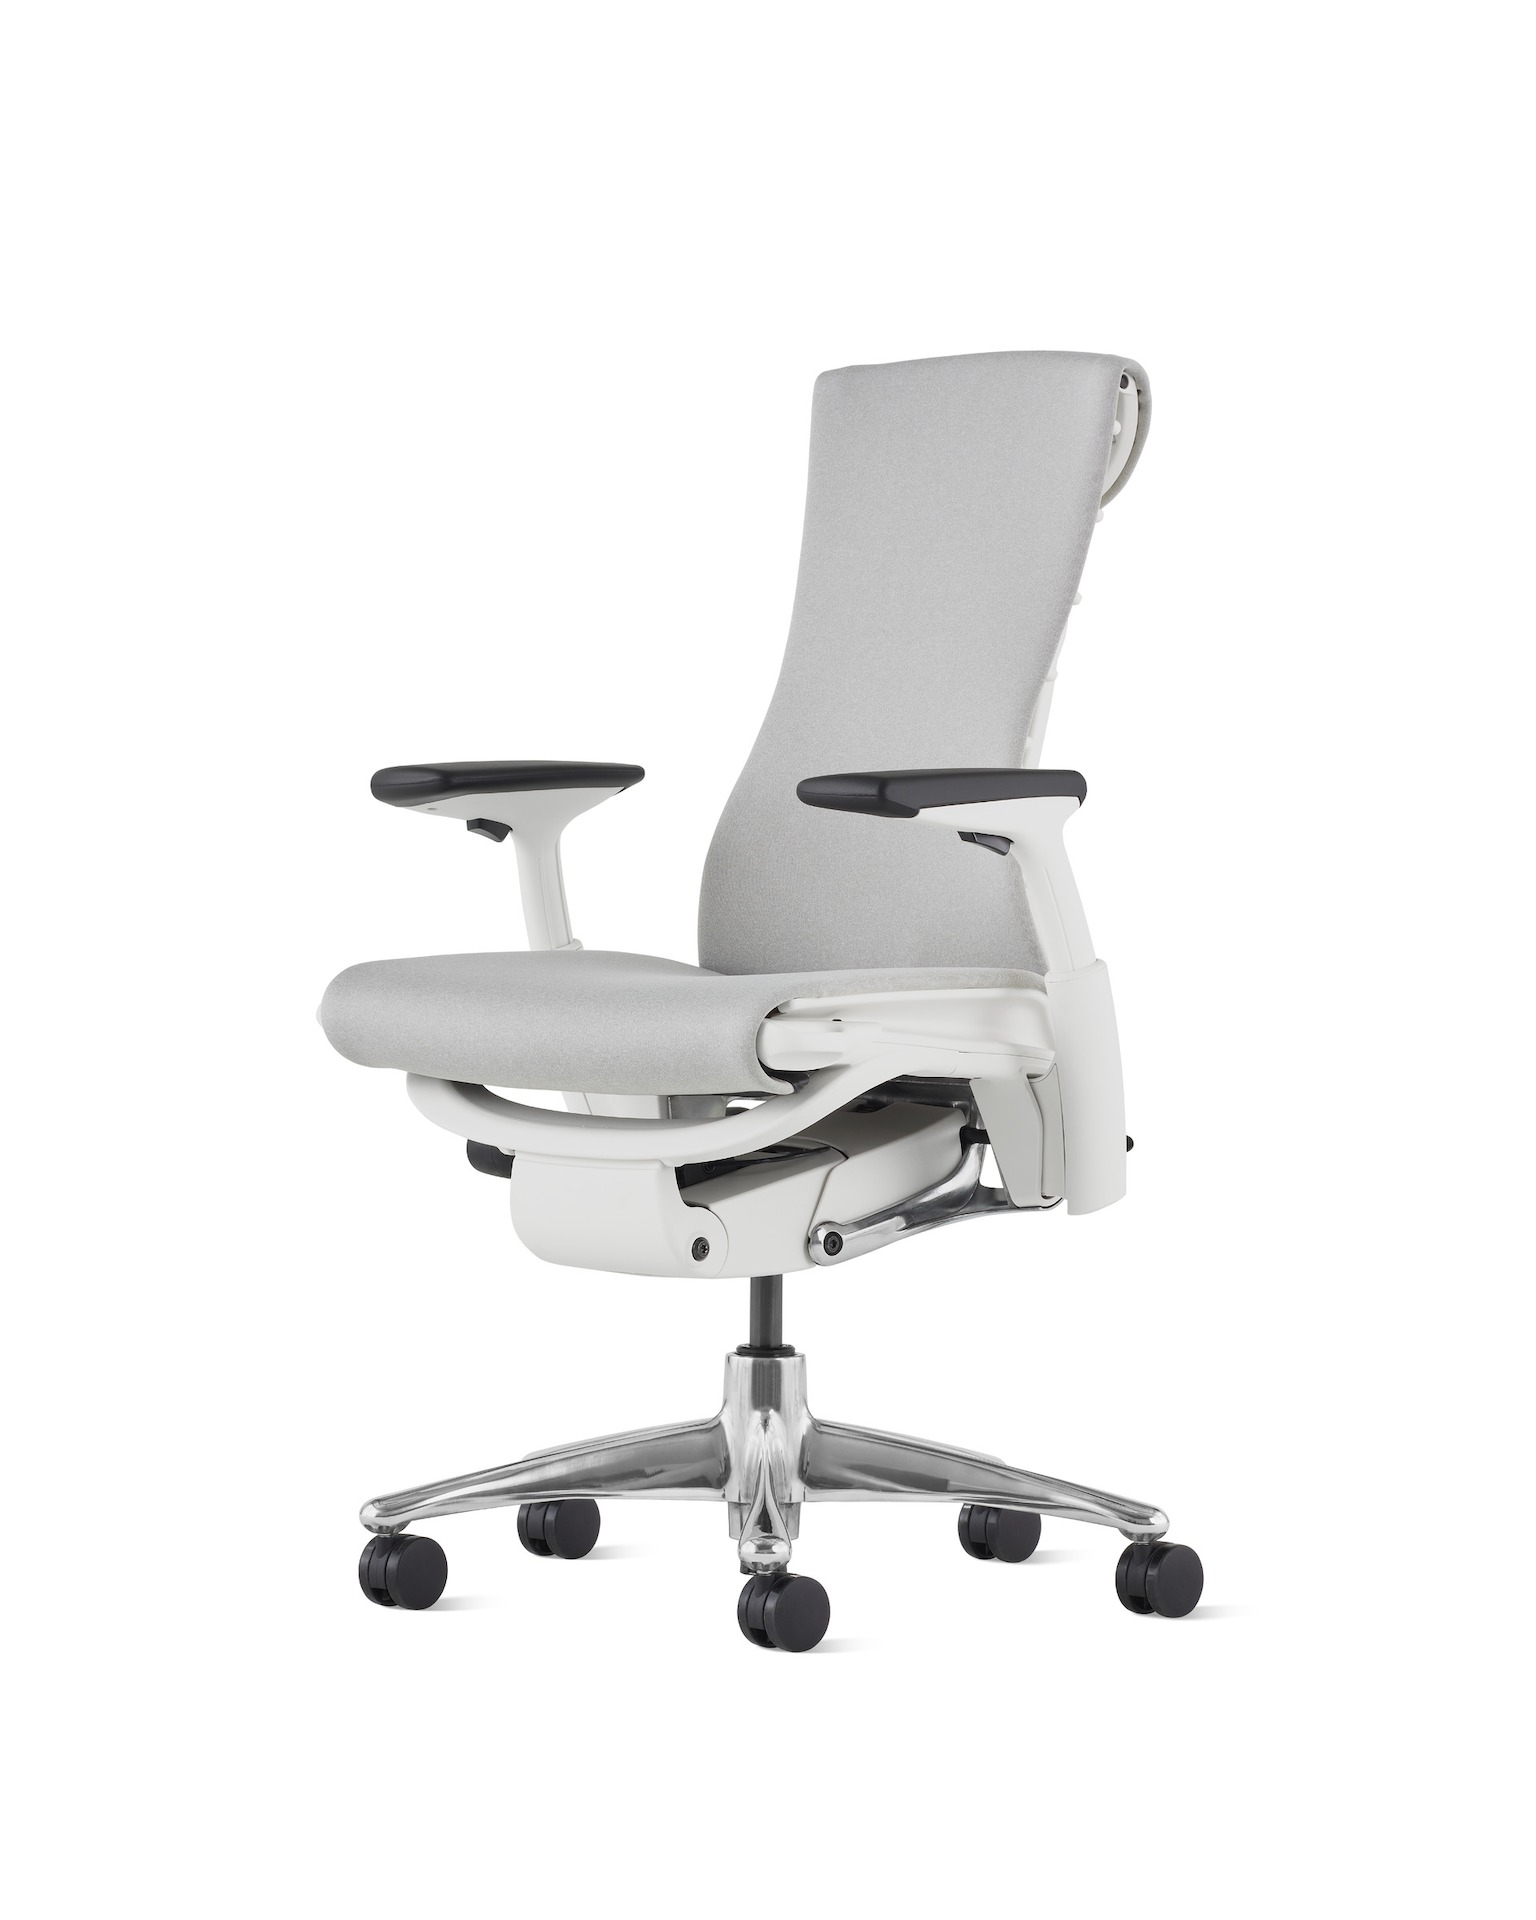 The Embody Chair (Updated 2022) By Herman Miller | lupon.gov.ph